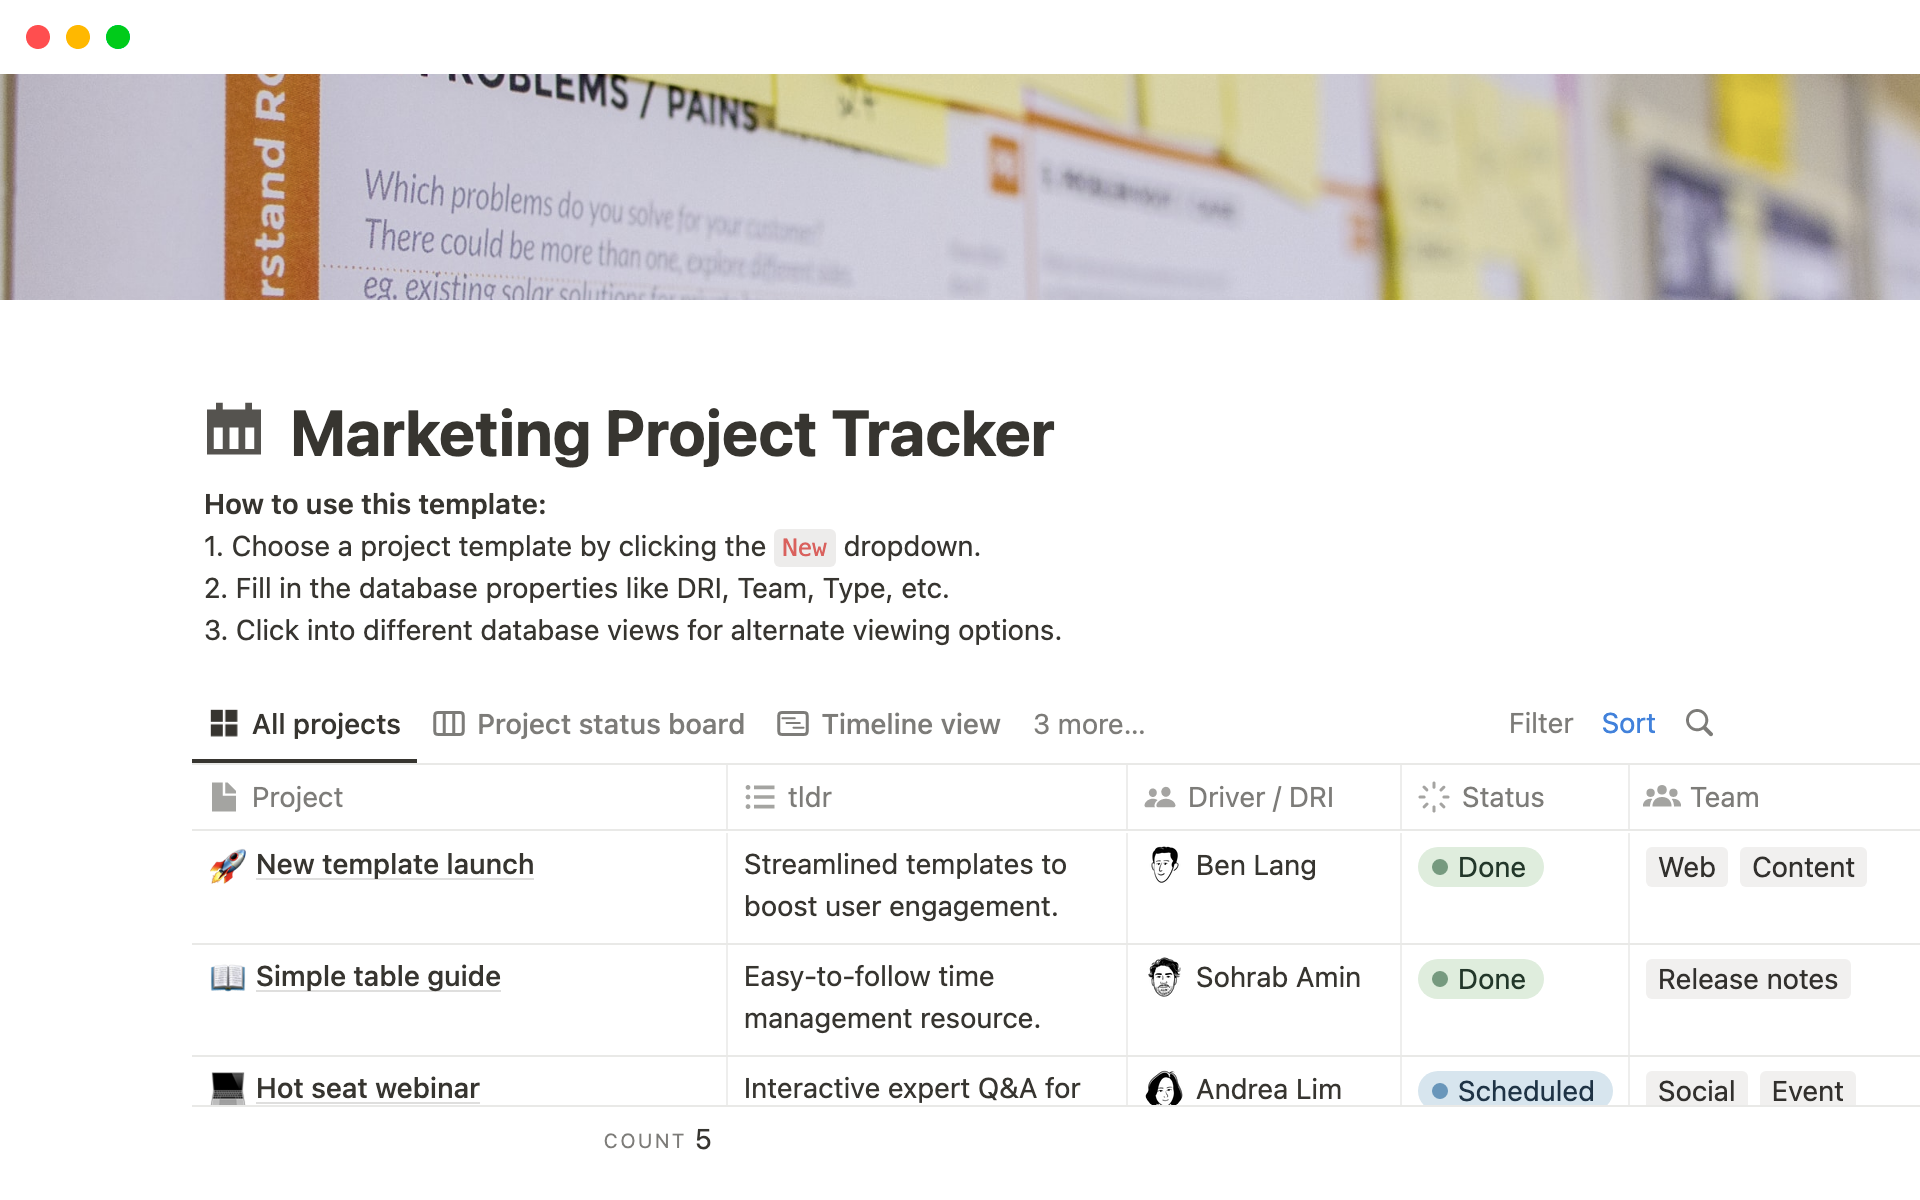 Create your marketing plan in Notion to monitor progress and stay on schedule